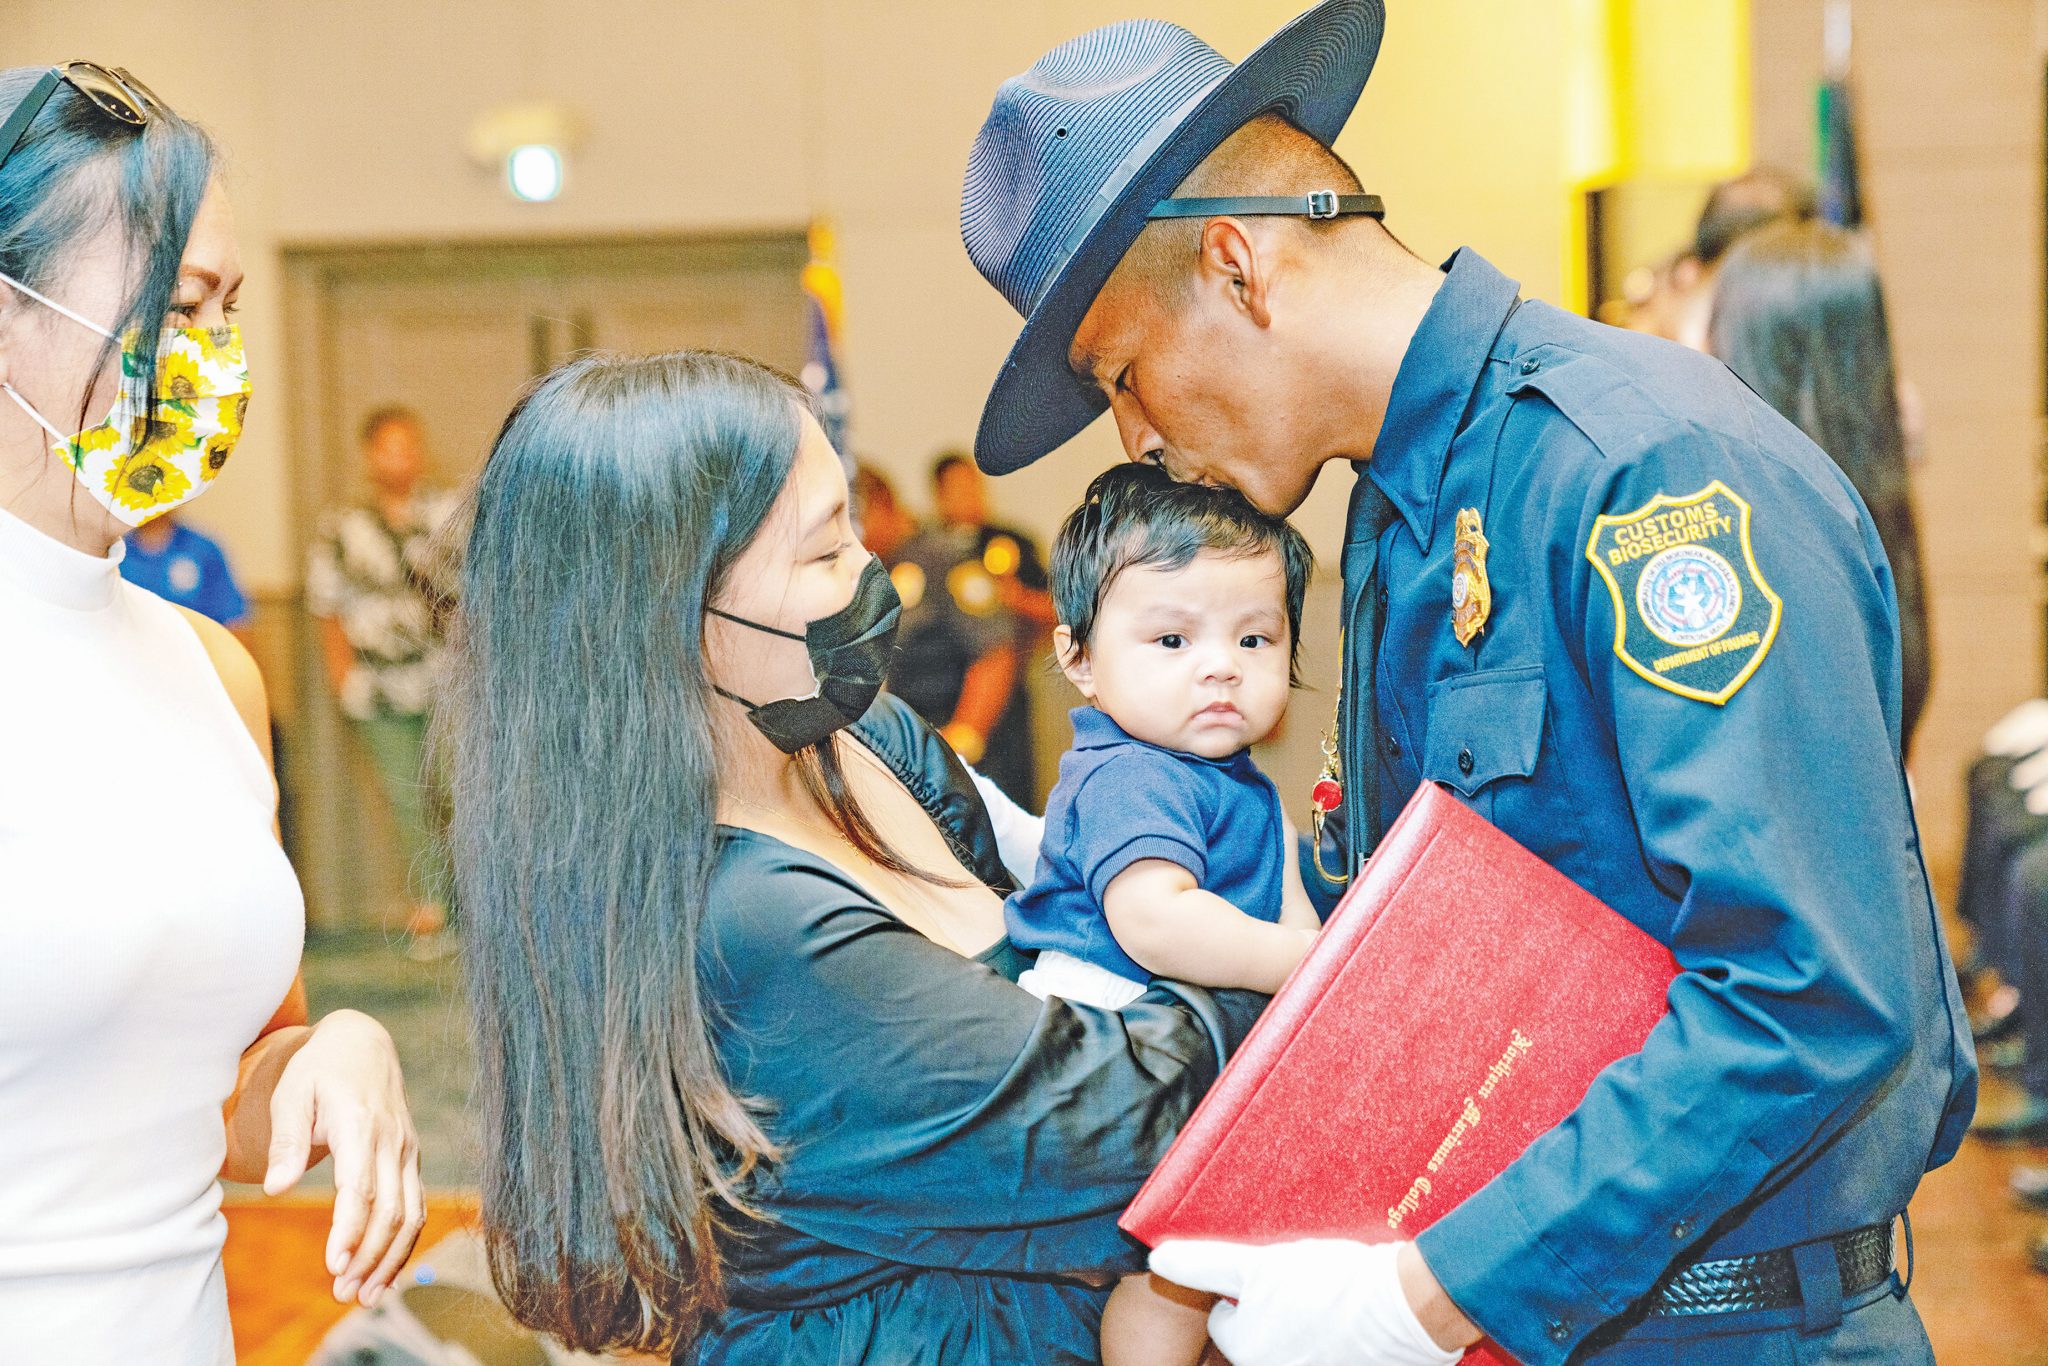 Customs and Biosecurity graduate Kane P. Ybanez plants a kiss on his son’s head after receiving his badge during the Division of Customs and Biosecurity 9th Cycle Academy graduation yesterday, July 25, 2022, at the Saipan World Resort’s Royal Taga Ballroom. The academy was coordinated in partnership with Northern Marianas College. Ybanez, who received a leadership recognition award during the ceremony, joins 28 other Customs and Biosecurity graduates. (NMC)